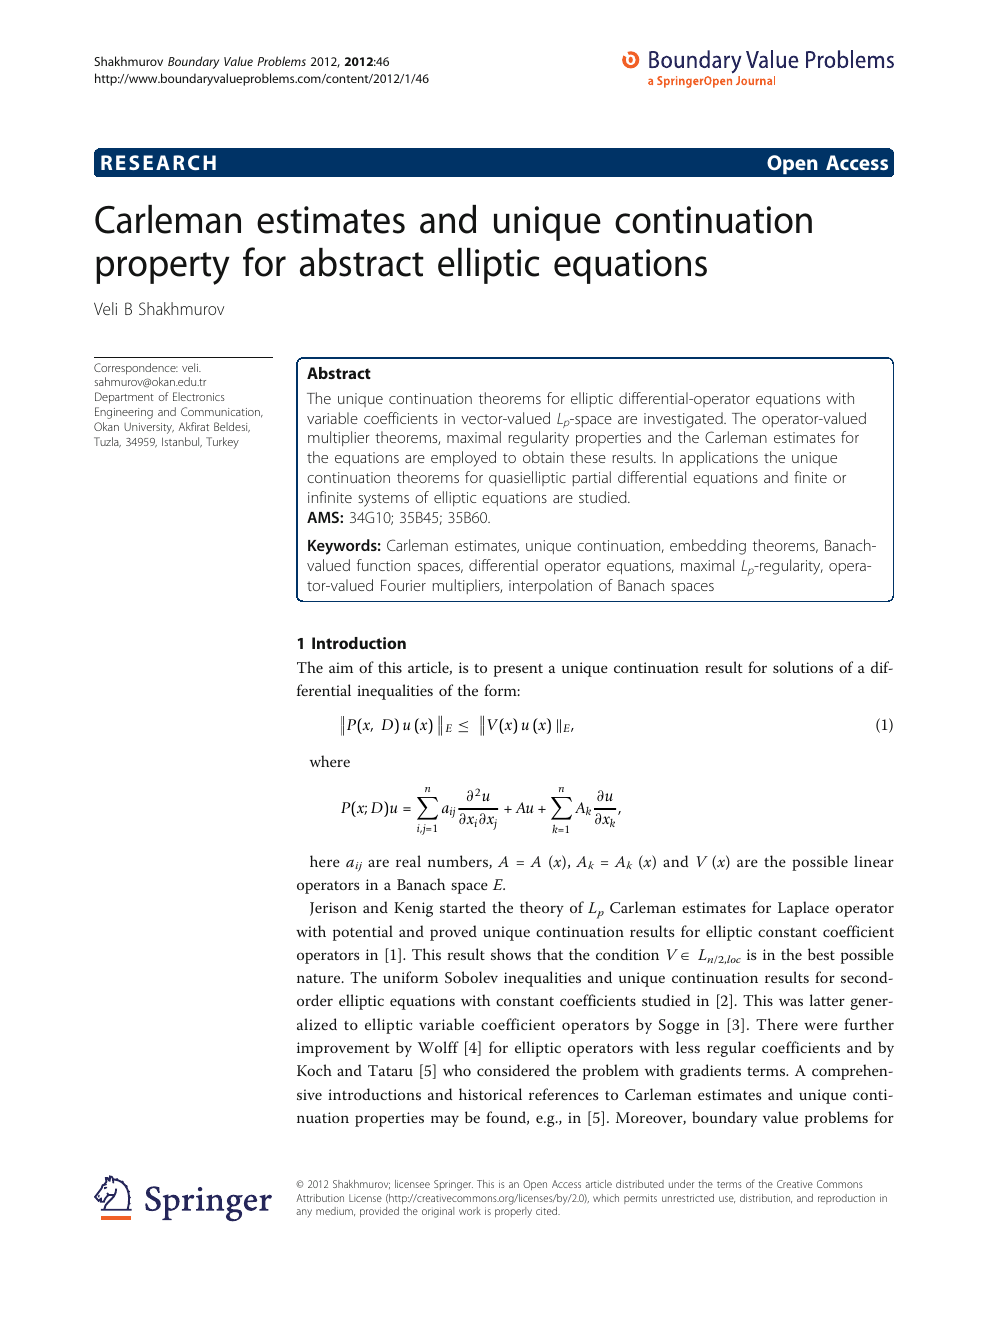 Carleman Estimates And Unique Continuation Property For Abstract Elliptic Equations Topic Of Research Paper In Mathematics Download Scholarly Article Pdf And Read For Free On Cyberleninka Open Science Hub